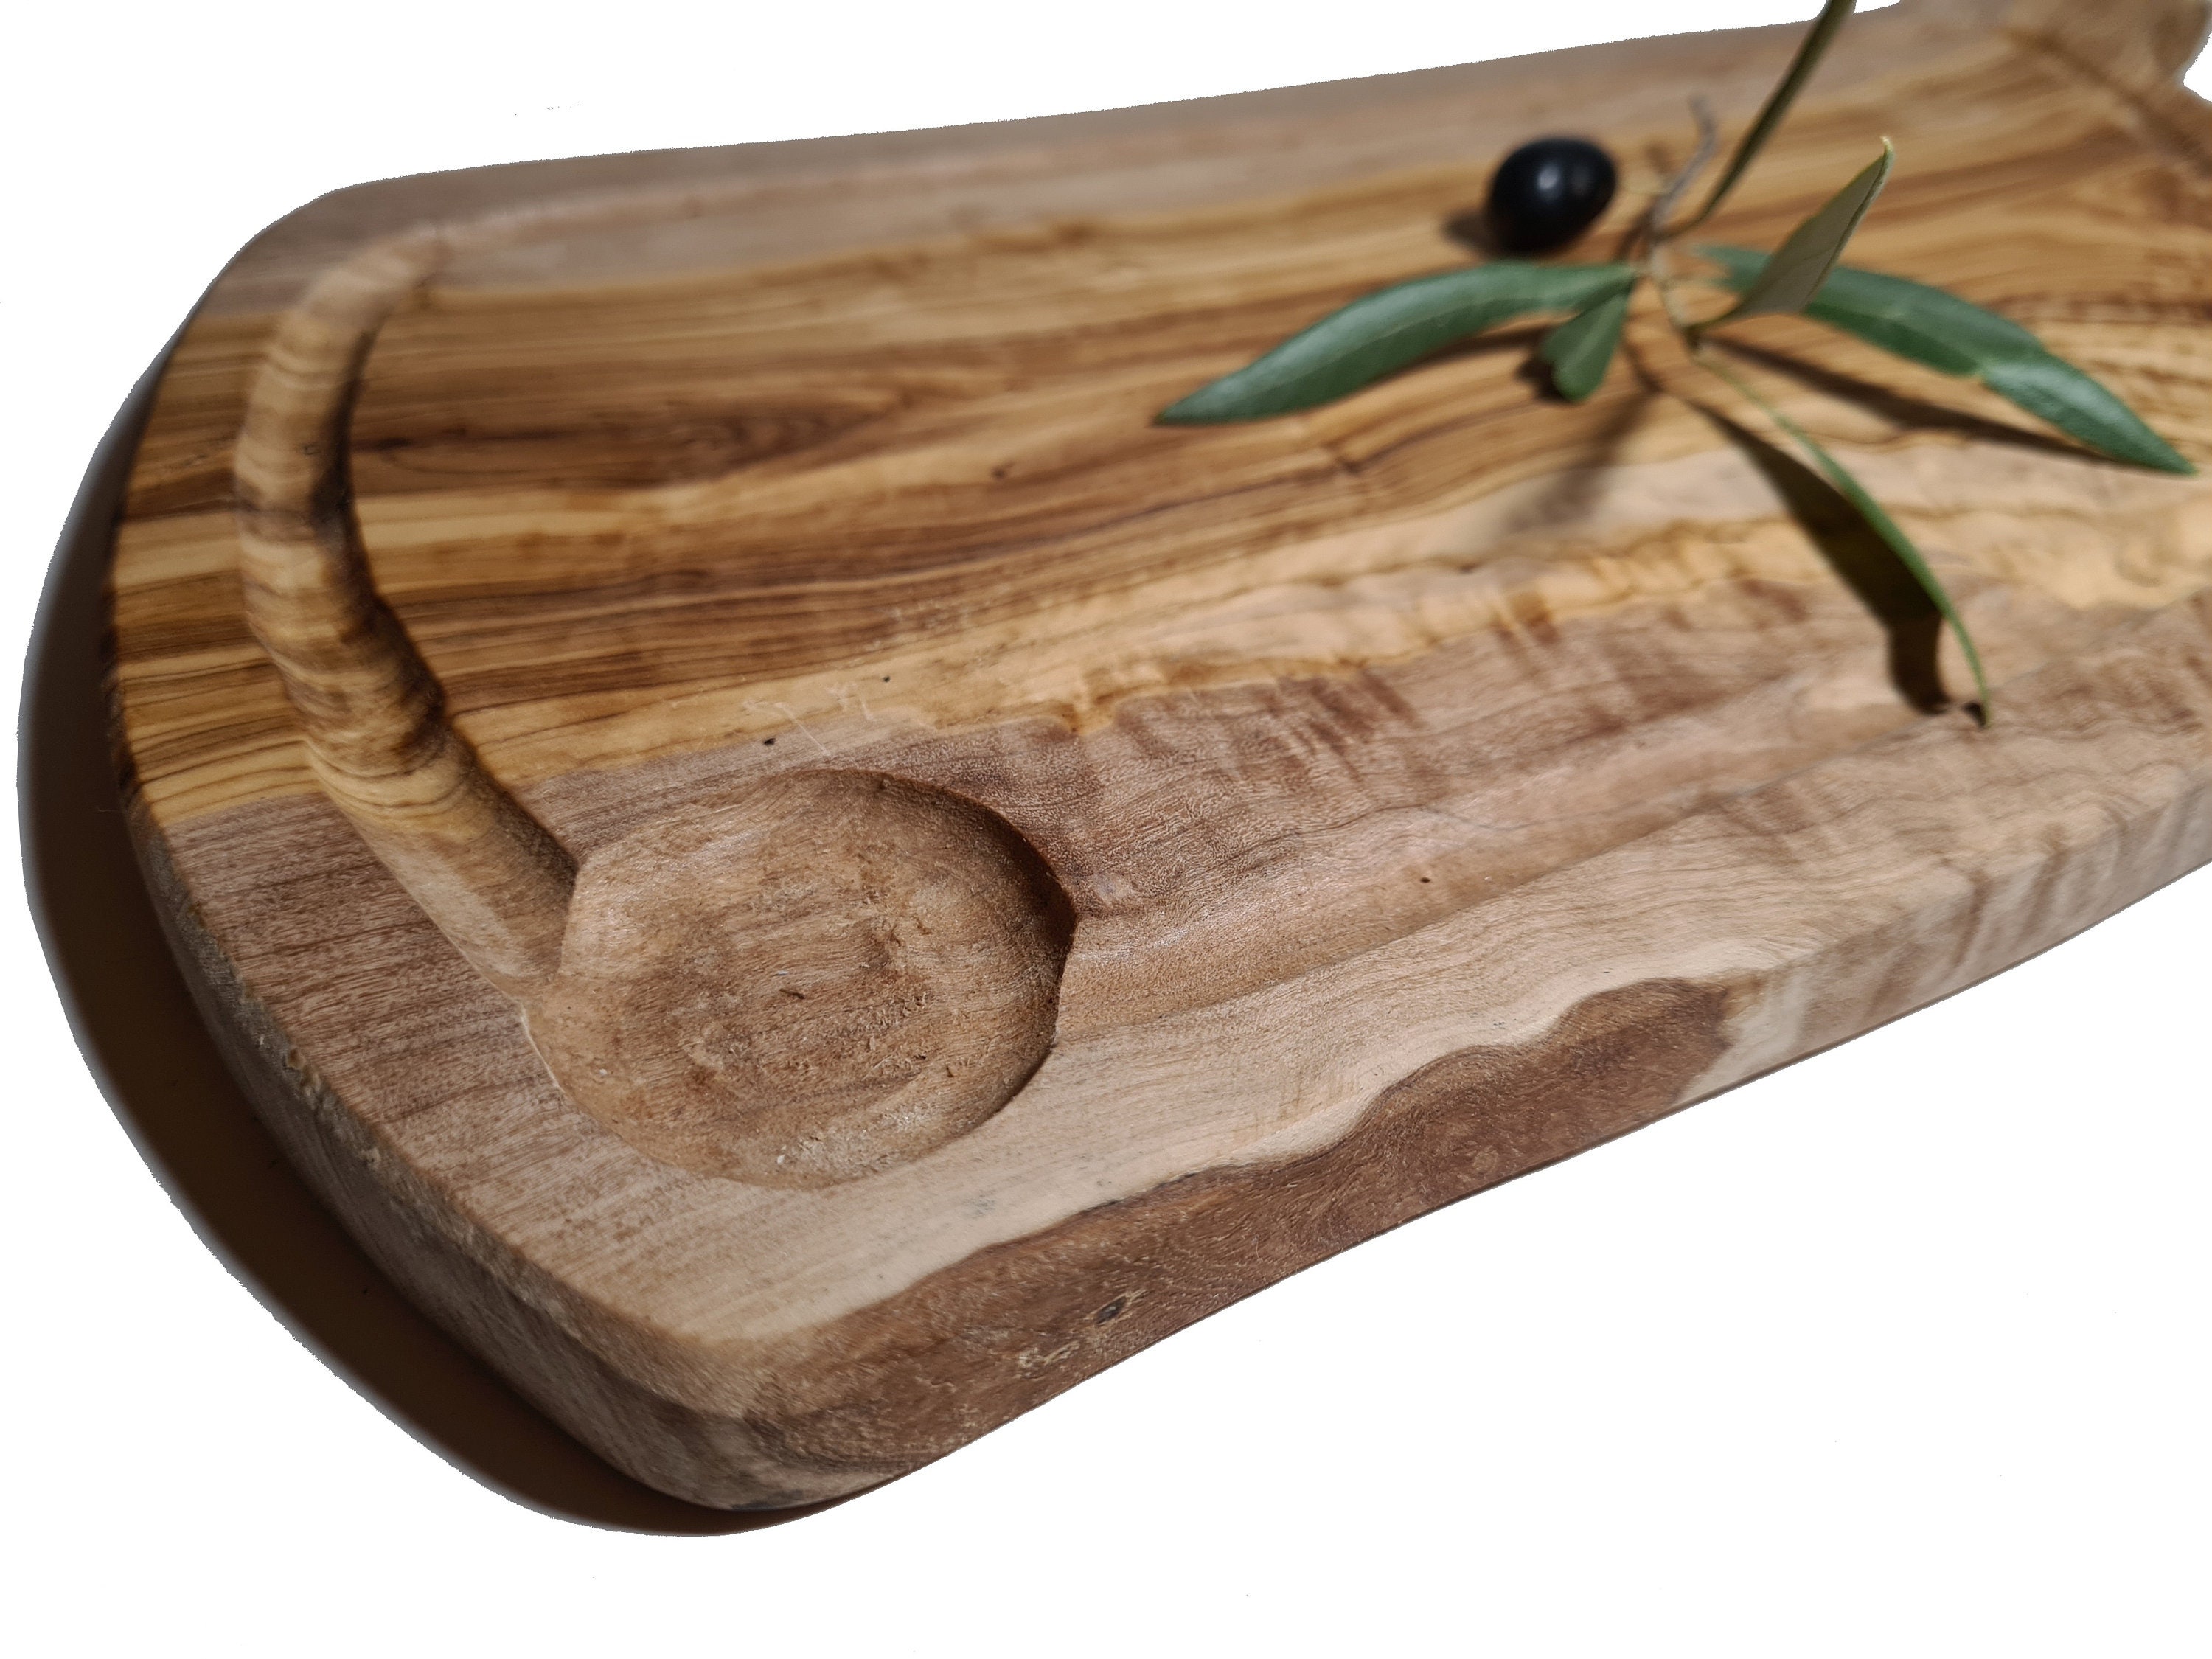 Natural cutting board with olive wood handle (6317)